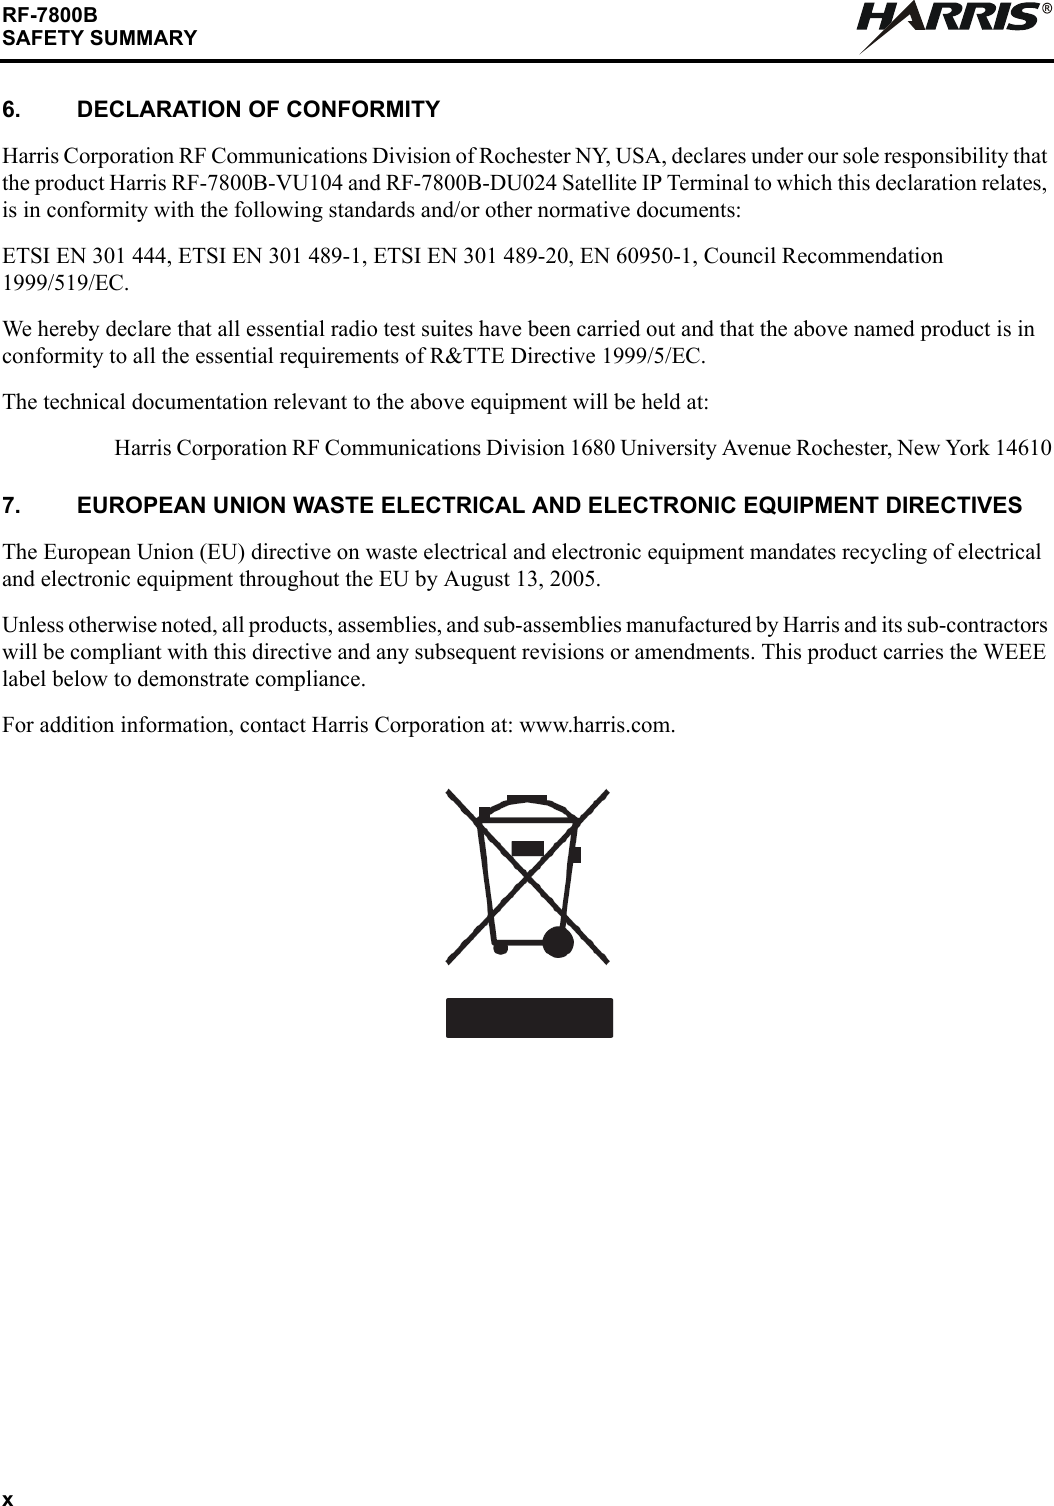 xRF-7800BSAFETY SUMMARYR6. DECLARATION OF CONFORMITYHarris Corporation RF Communications Division of Rochester NY, USA, declares under our sole responsibility that the product Harris RF-7800B-VU104 and RF-7800B-DU024 Satellite IP Terminal to which this declaration relates, is in conformity with the following standards and/or other normative documents:ETSI EN 301 444, ETSI EN 301 489-1, ETSI EN 301 489-20, EN 60950-1, Council Recommendation 1999/519/EC.We hereby declare that all essential radio test suites have been carried out and that the above named product is in conformity to all the essential requirements of R&amp;TTE Directive 1999/5/EC.The technical documentation relevant to the above equipment will be held at:Harris Corporation RF Communications Division 1680 University Avenue Rochester, New York 146107. EUROPEAN UNION WASTE ELECTRICAL AND ELECTRONIC EQUIPMENT DIRECTIVESThe European Union (EU) directive on waste electrical and electronic equipment mandates recycling of electrical and electronic equipment throughout the EU by August 13, 2005.Unless otherwise noted, all products, assemblies, and sub-assemblies manufactured by Harris and its sub-contractors will be compliant with this directive and any subsequent revisions or amendments. This product carries the WEEE label below to demonstrate compliance.For addition information, contact Harris Corporation at: www.harris.com. 